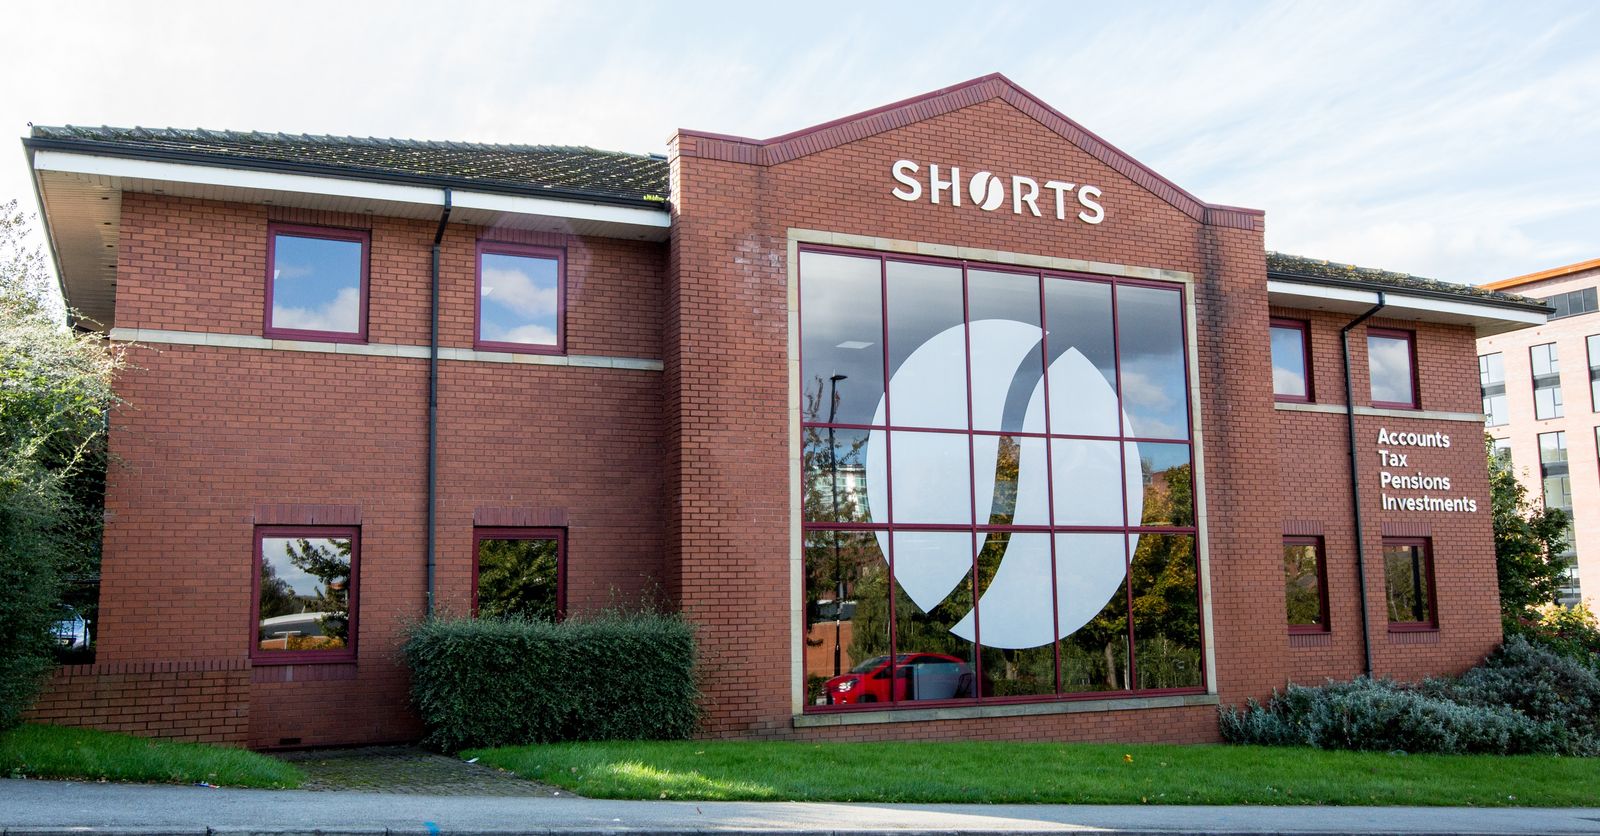 Shorts renew their Chamber Patronage for 7th consecutive year